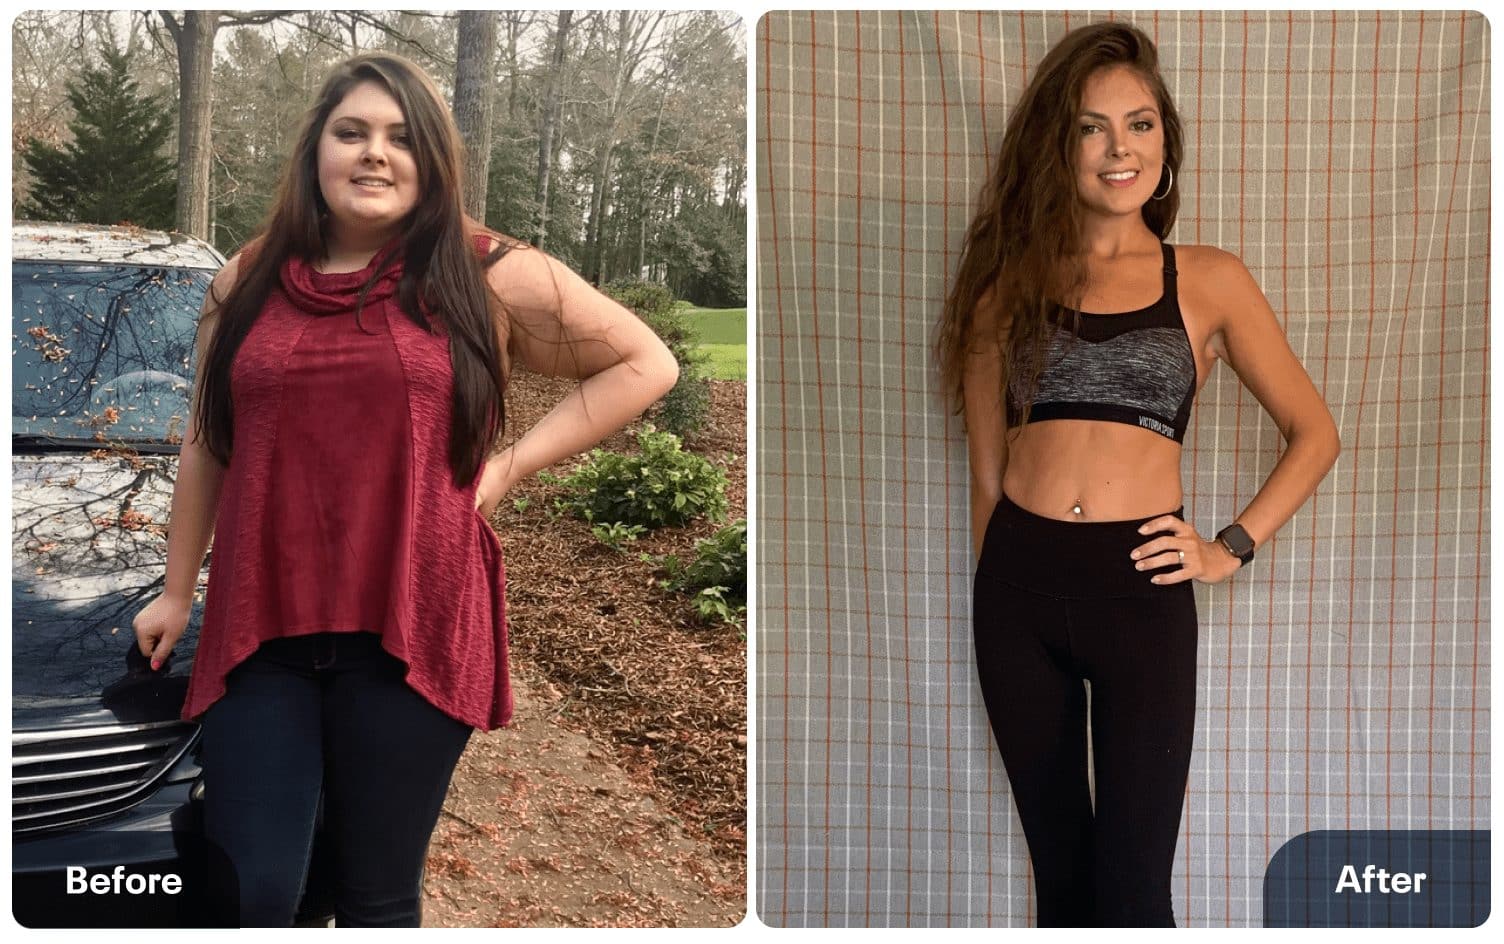 Kaylin Lost 100 Pounds by Counting Calories and Walking